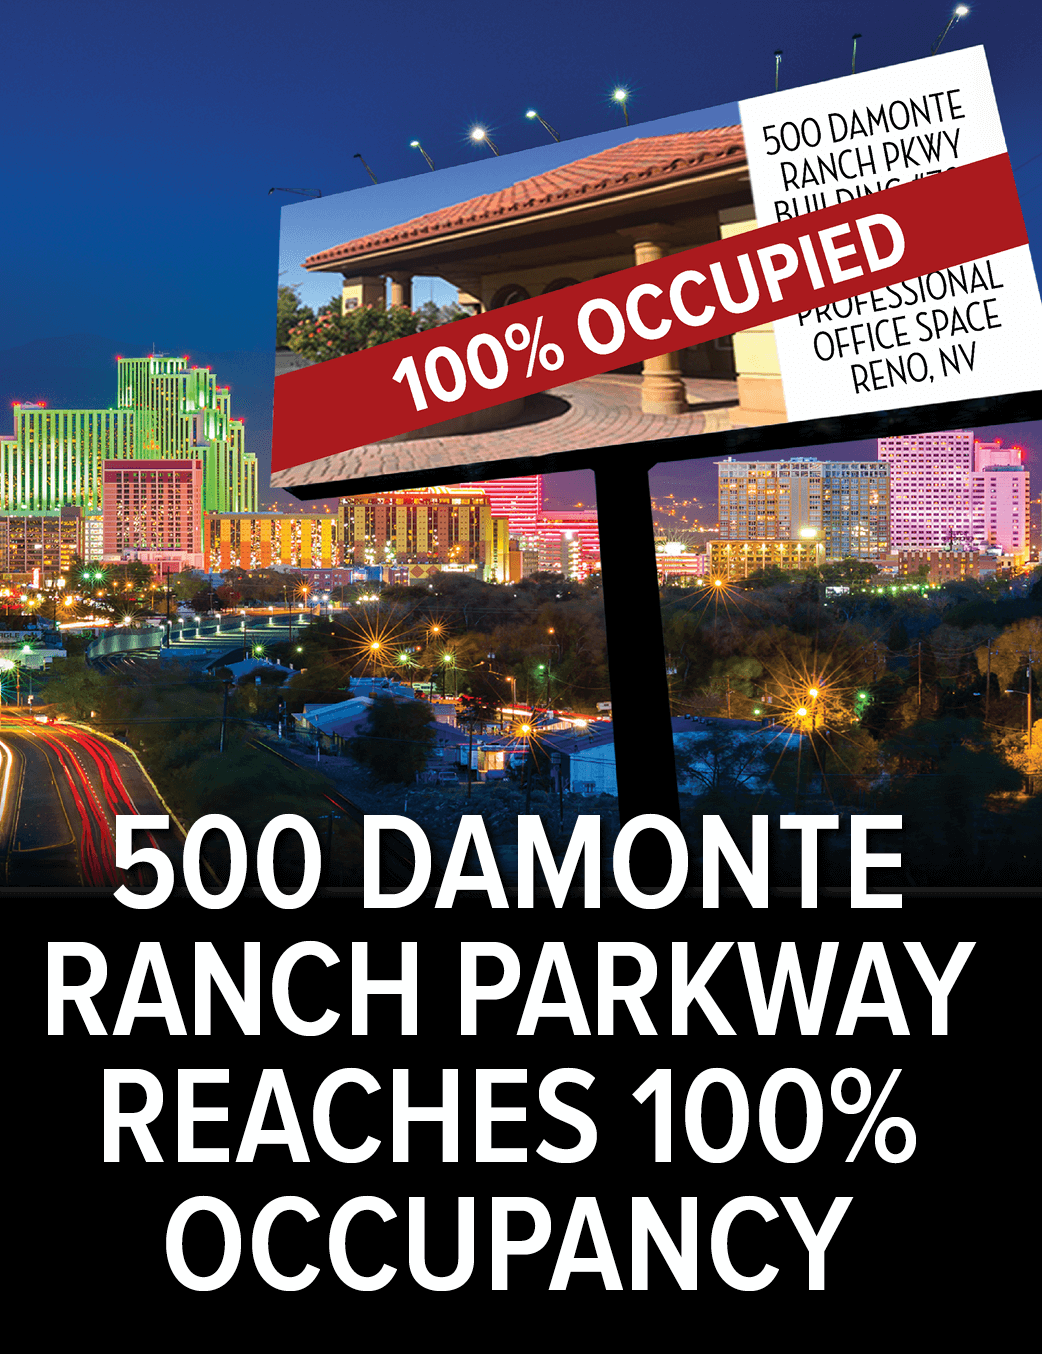 RM&D Leases 500 Damonte Ranch Parkway to 100% Occupancy